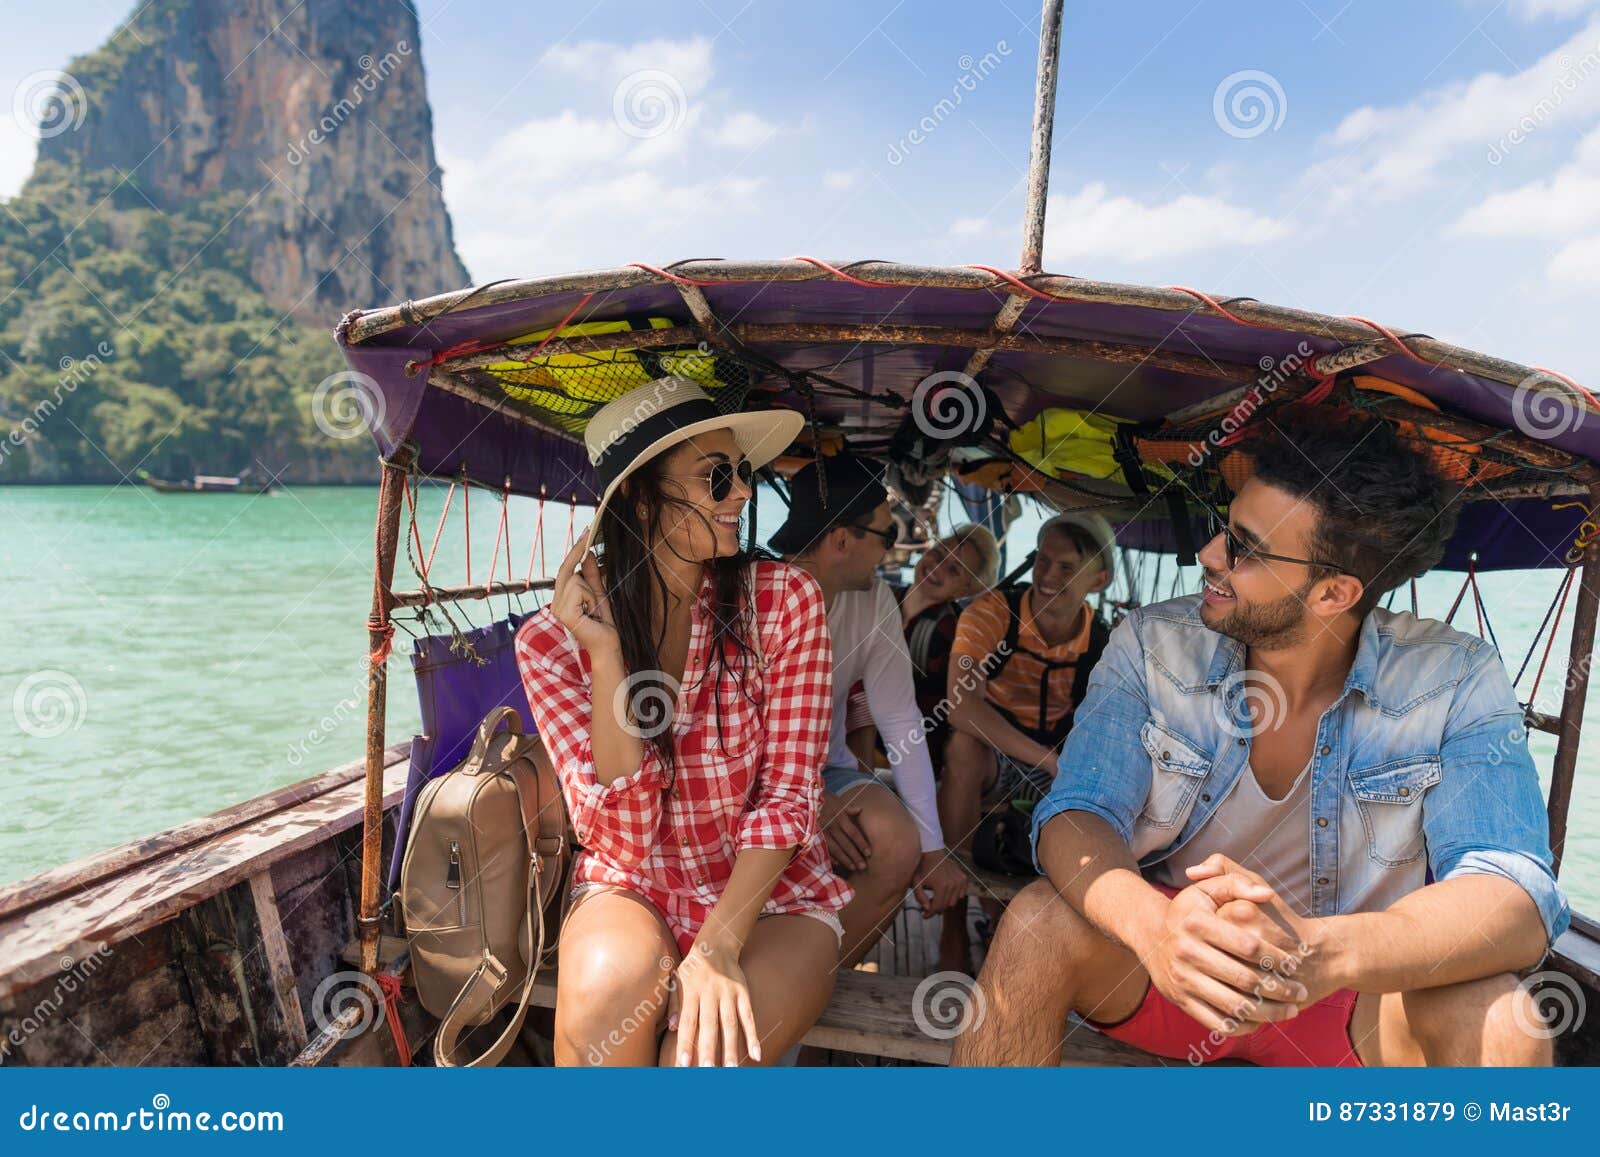 young people group tourist sail long tail thailand boat ocean friends sea vacation travel trip